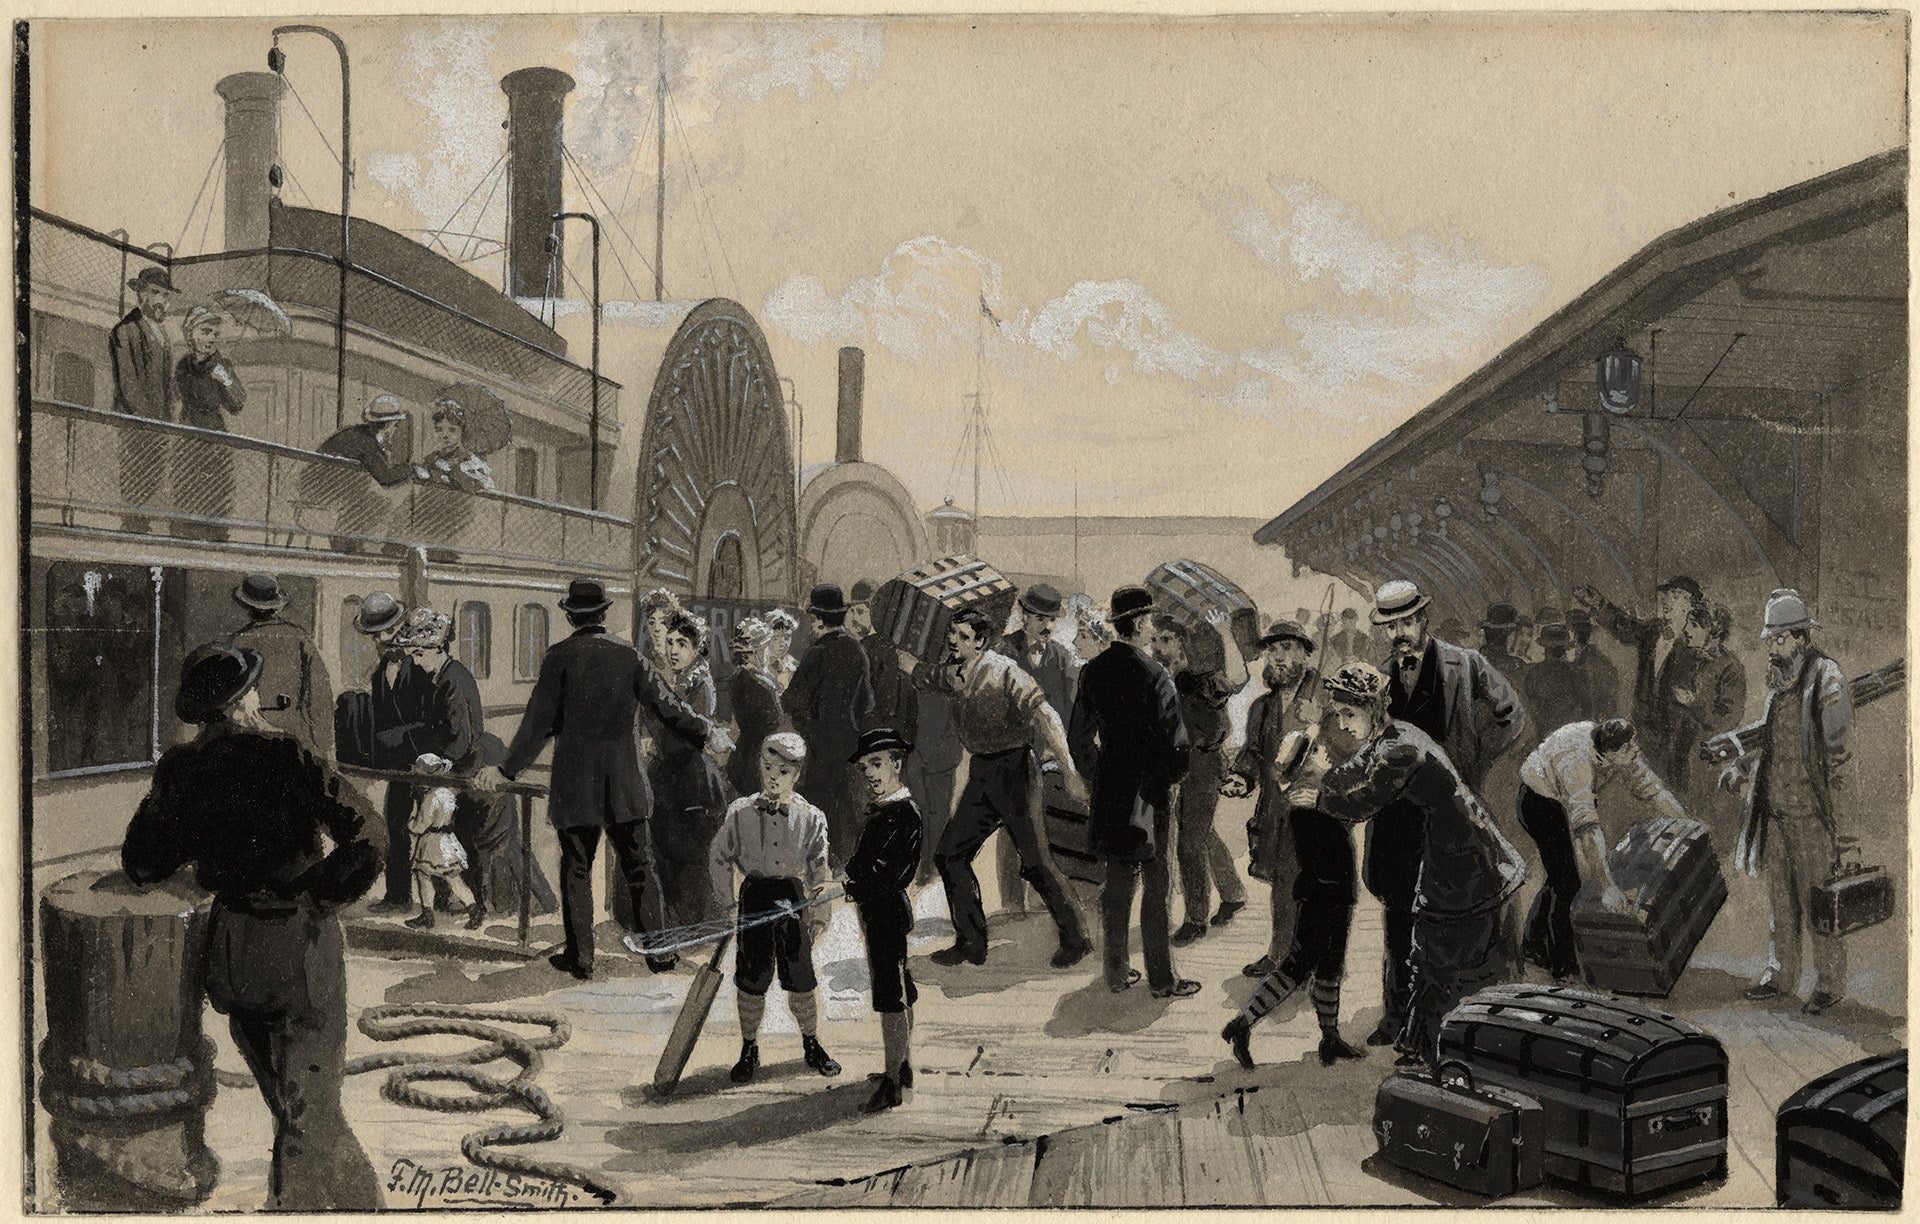 Painting by F. M. Bell-Smith from the late 1880s of the Yonge Street Wharf